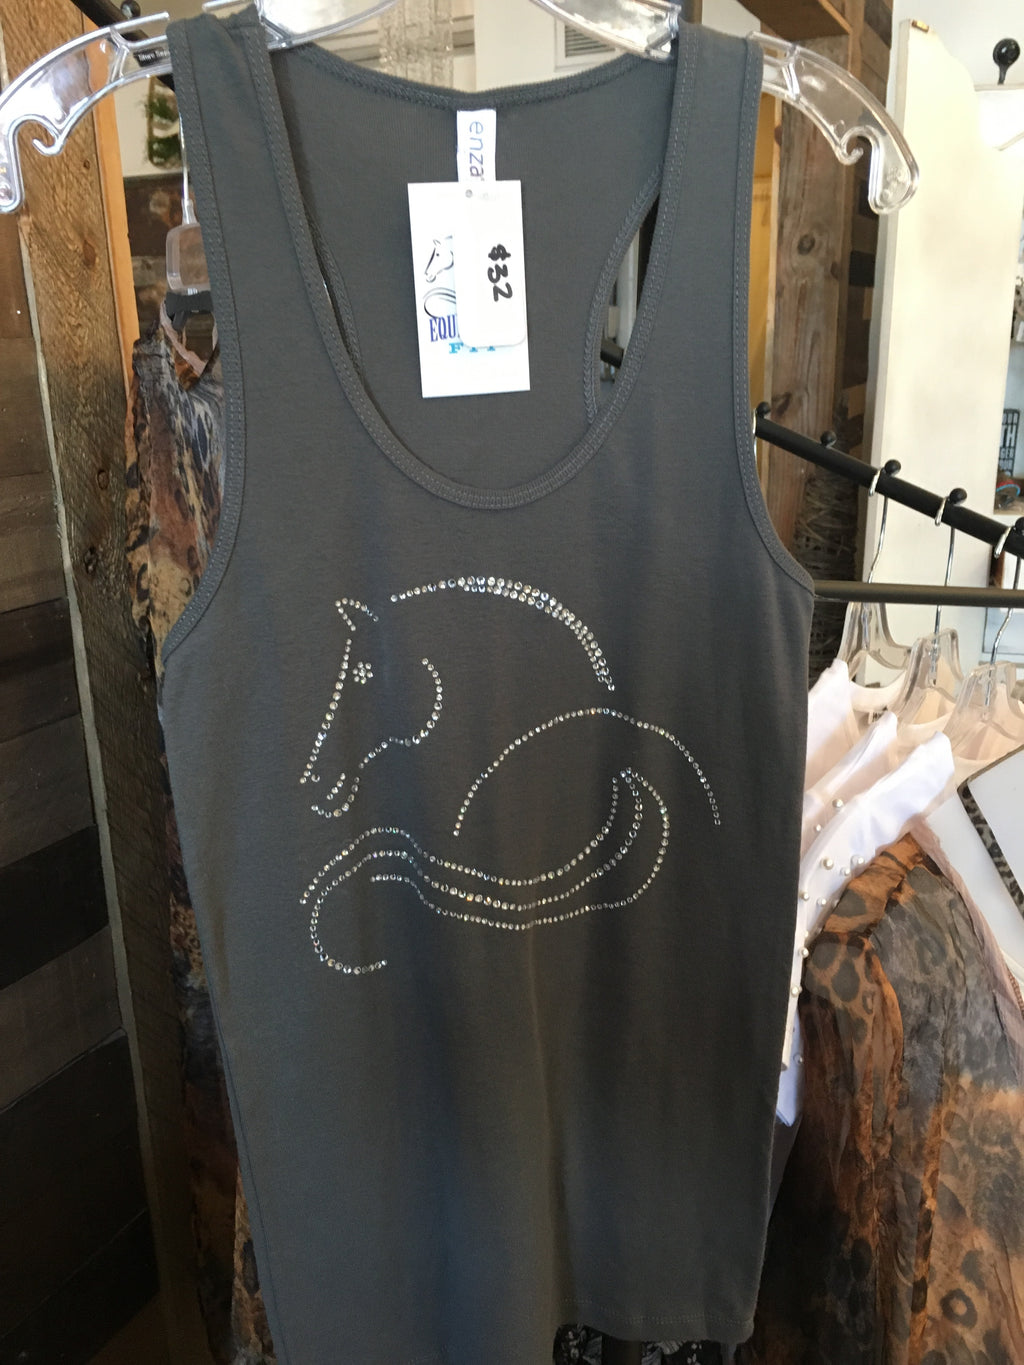 EF Charcoal Gray Bling Horse Tank